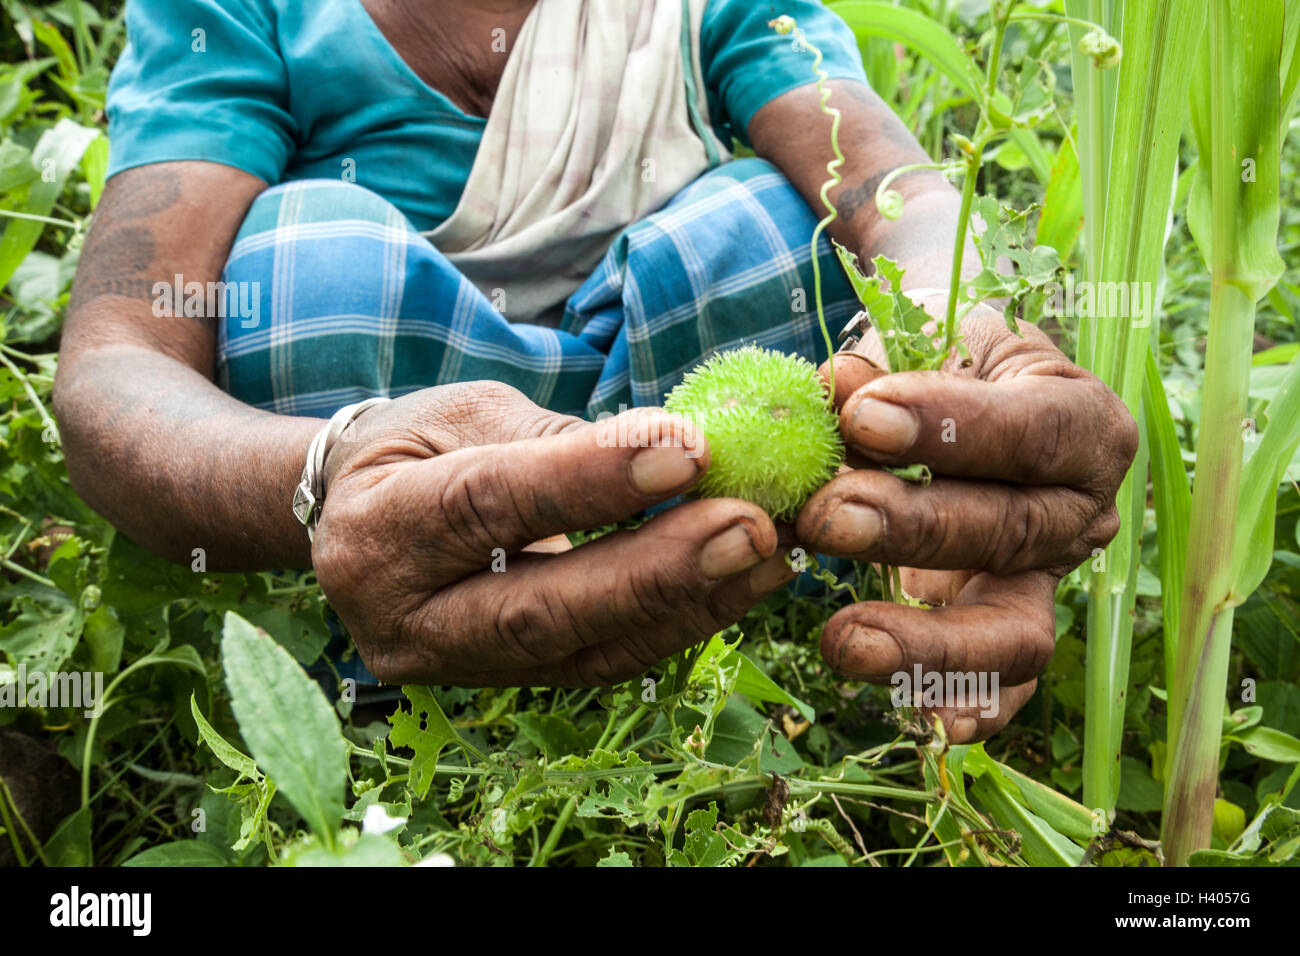 Indigenous Adivasi woman collecting an uncultivated ruit in a forest in Jharkhand, India Stock Photo